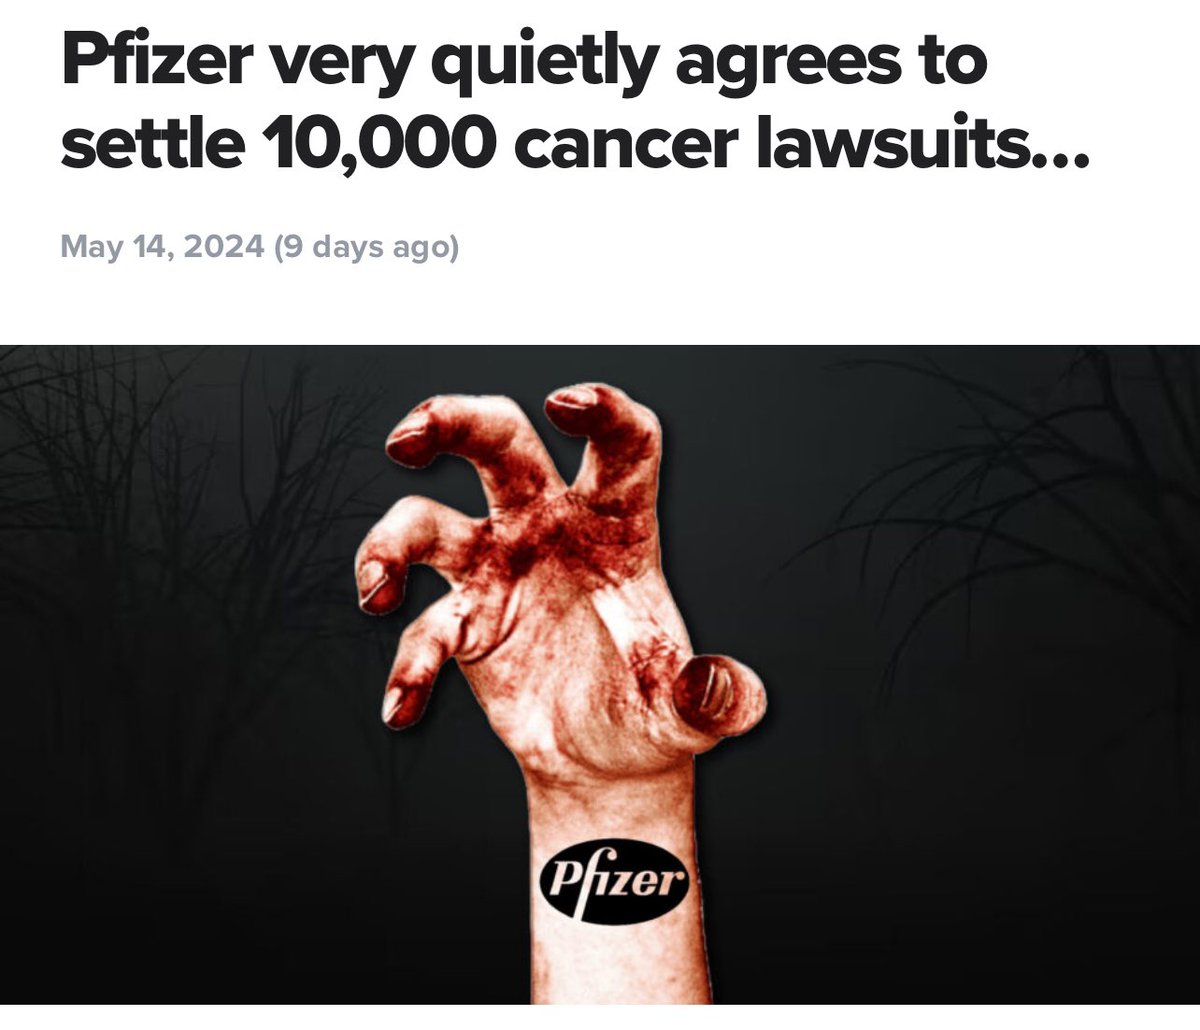 Pfizer, a titan in Big Pharma, has just settled a shocking 10,000 lawsuits linked to cancer and the antacid Zantac. The heartburn medication was proven to be linked to cases of cancer. Unsuspecting victims were able to easily access the medication as it was marketed to the